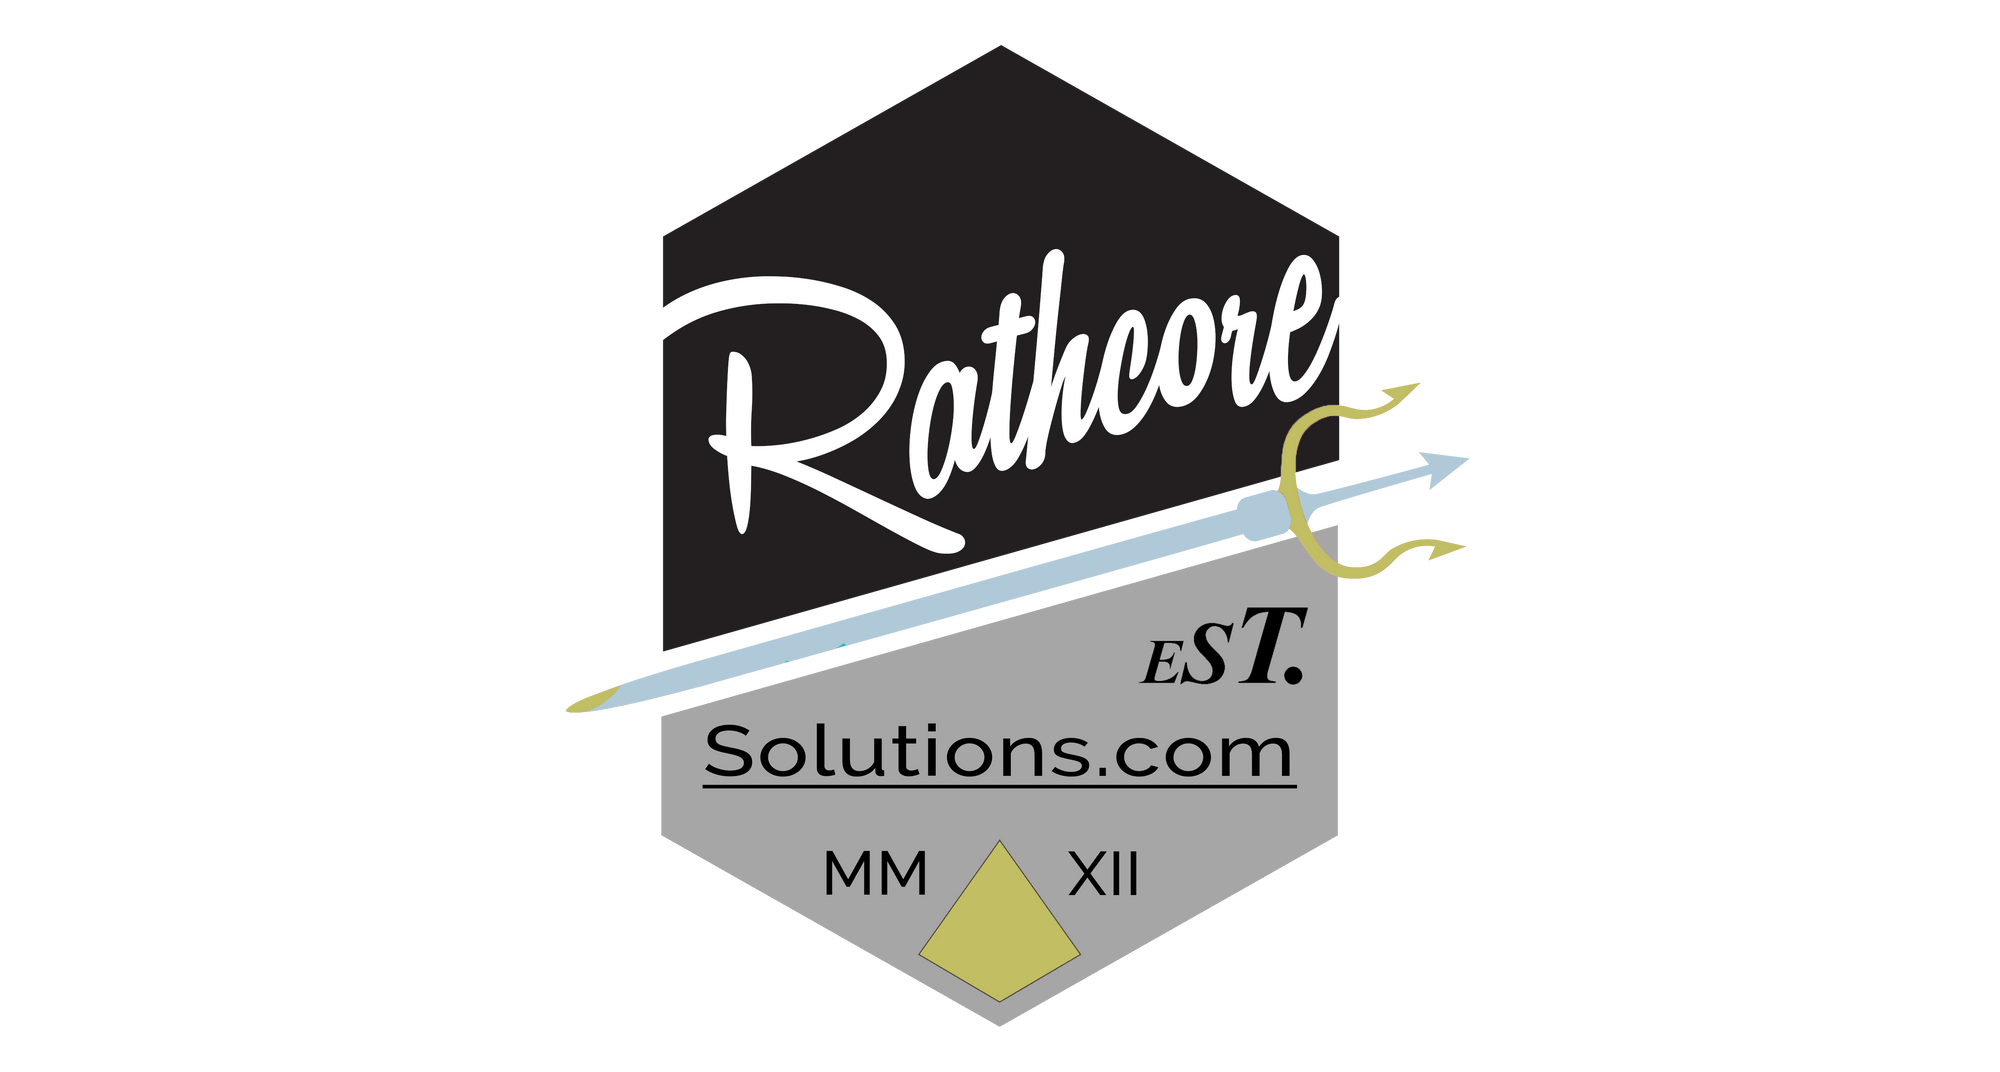 One-stop-shop for Your Online Business - Rathcore Solutions